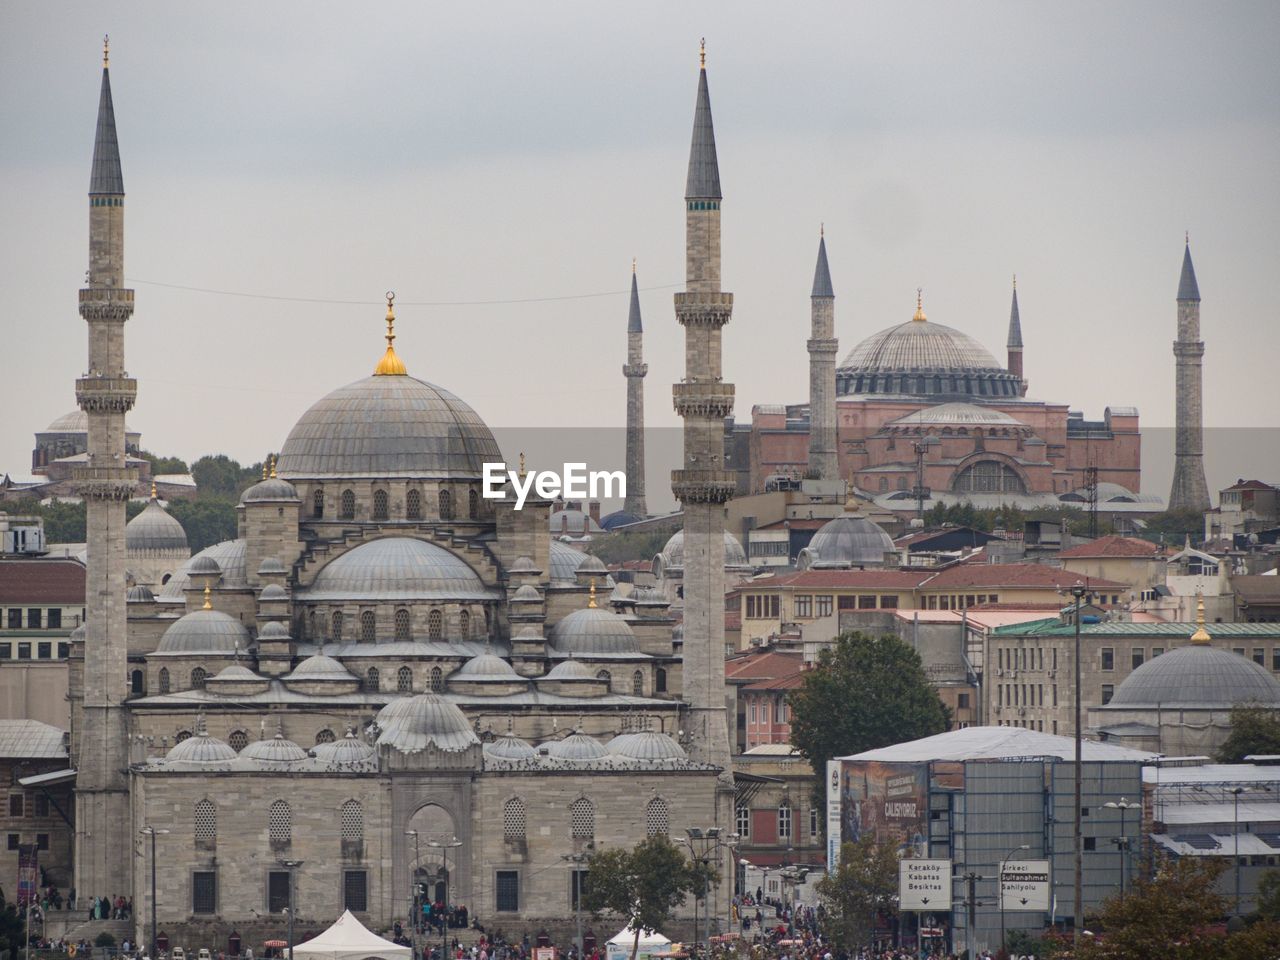 Sultan ahmed mosque and hagia sophia against cloudy sky